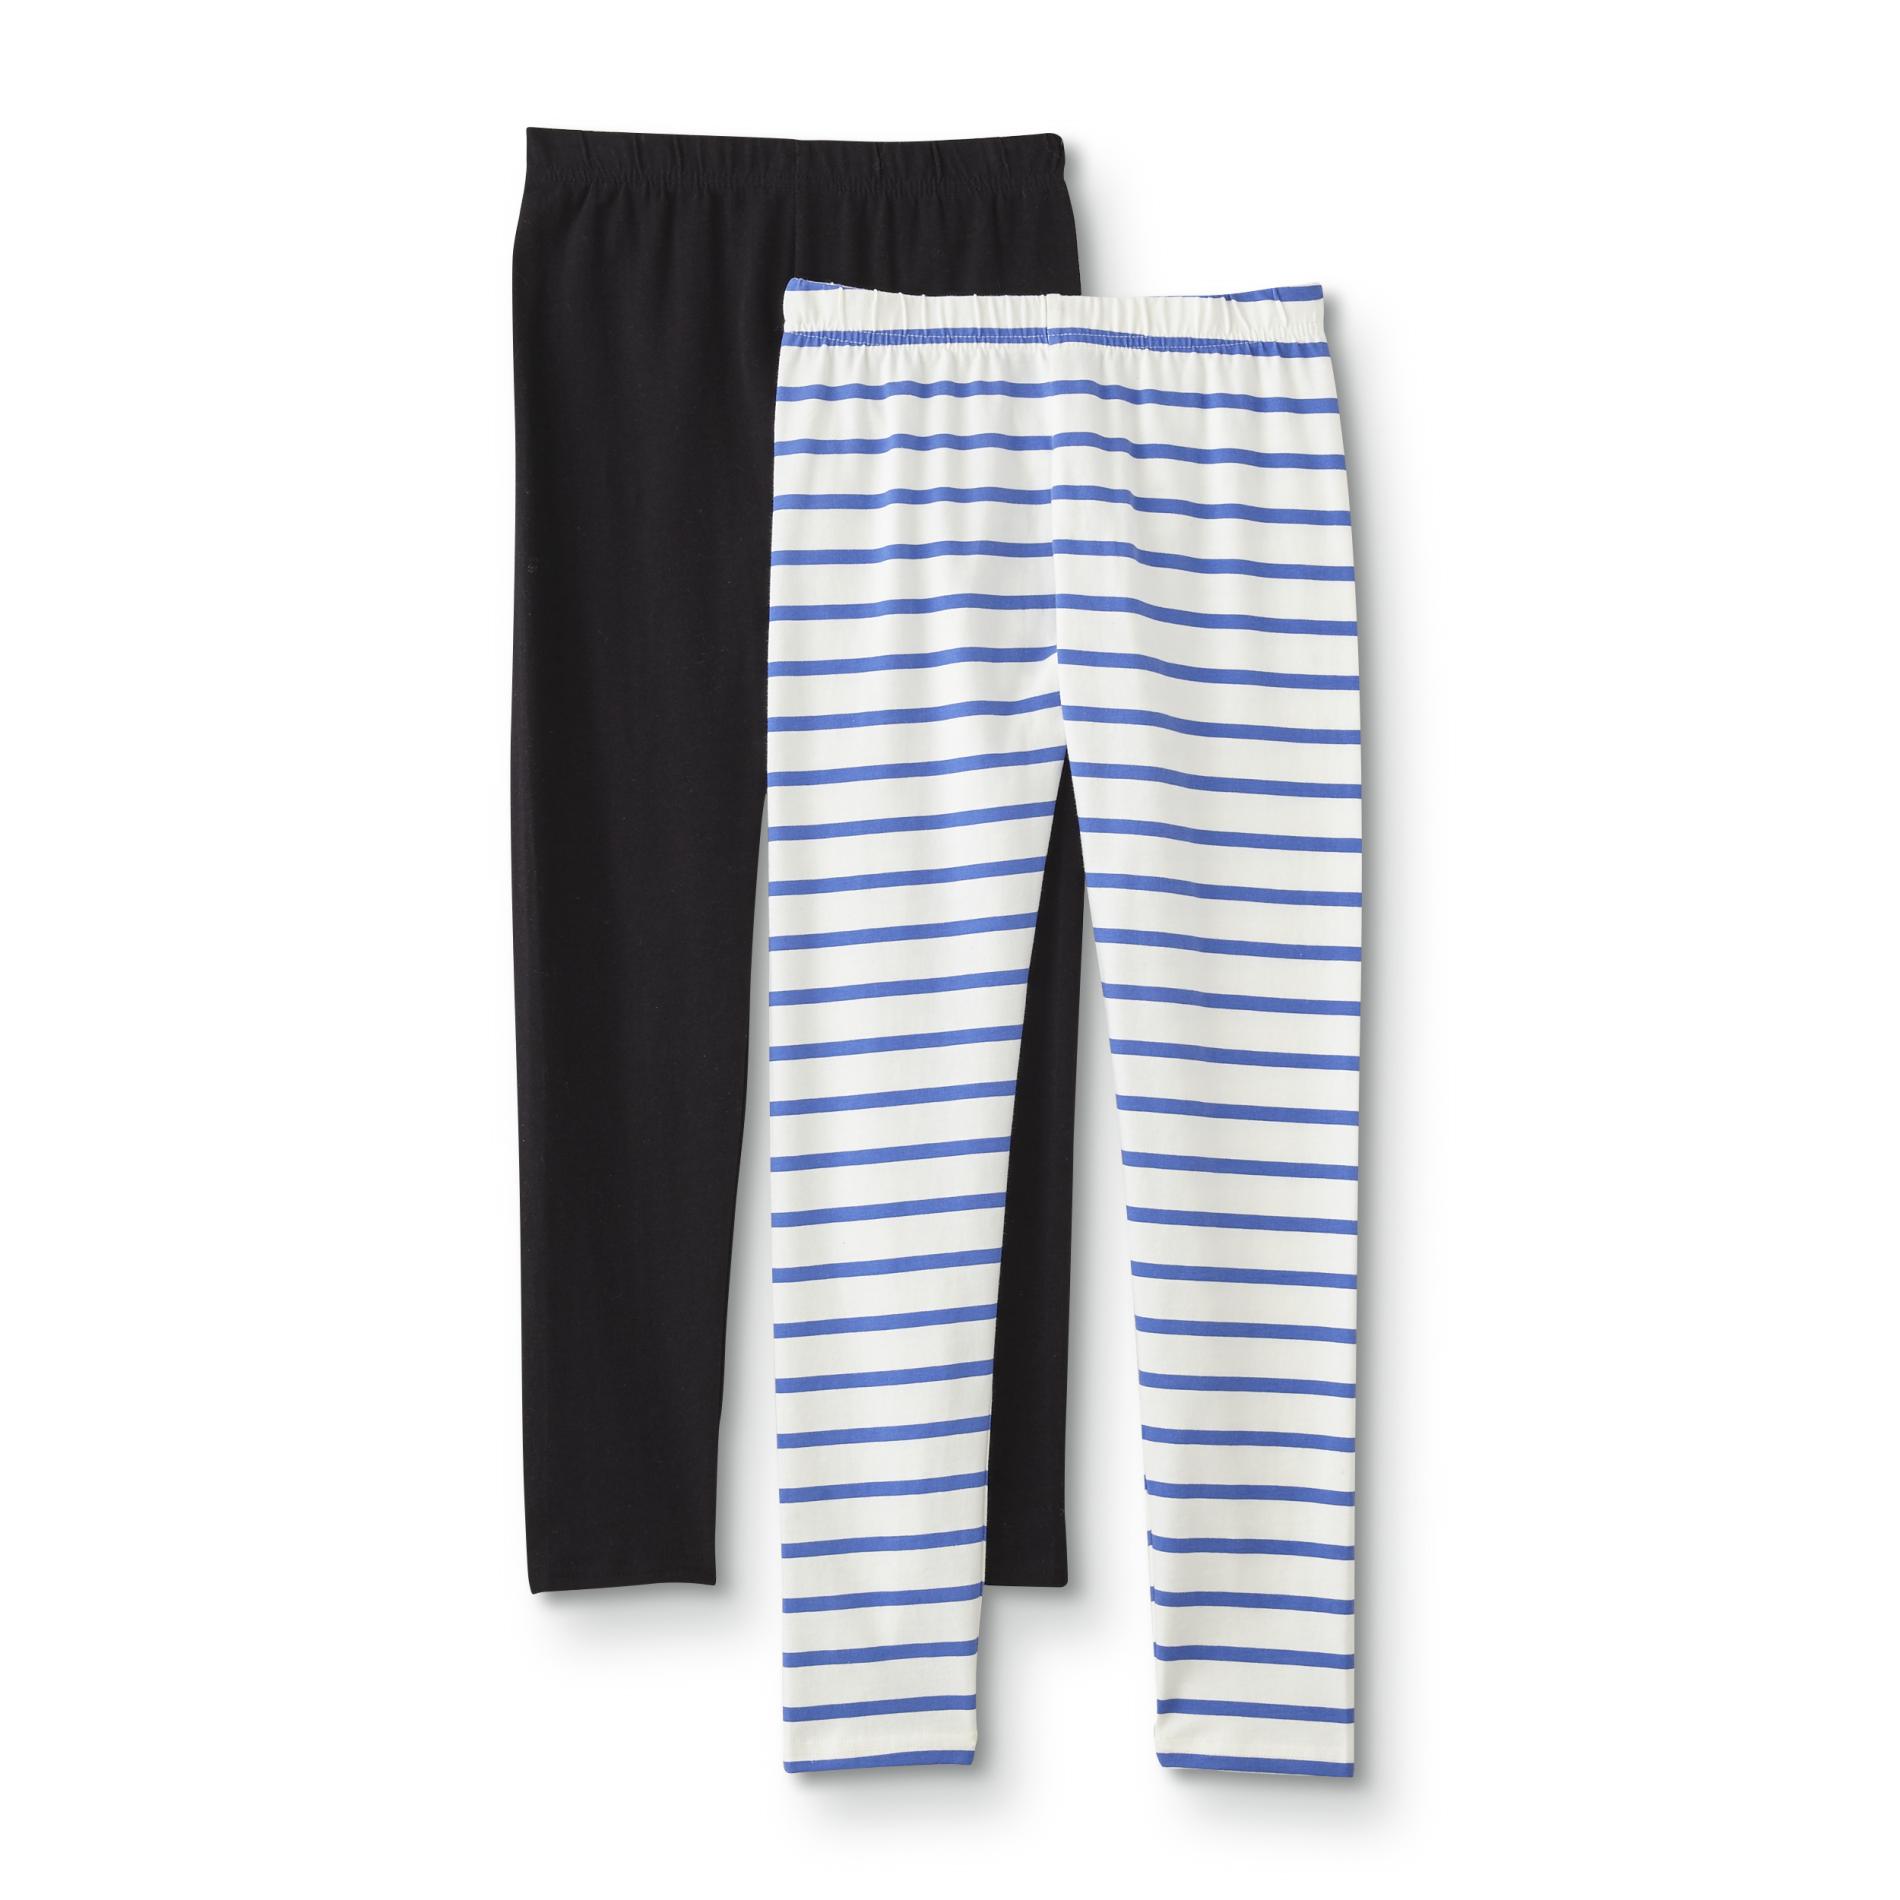 Simply Styled Girls' 2-Pack Leggings - Striped & Solid